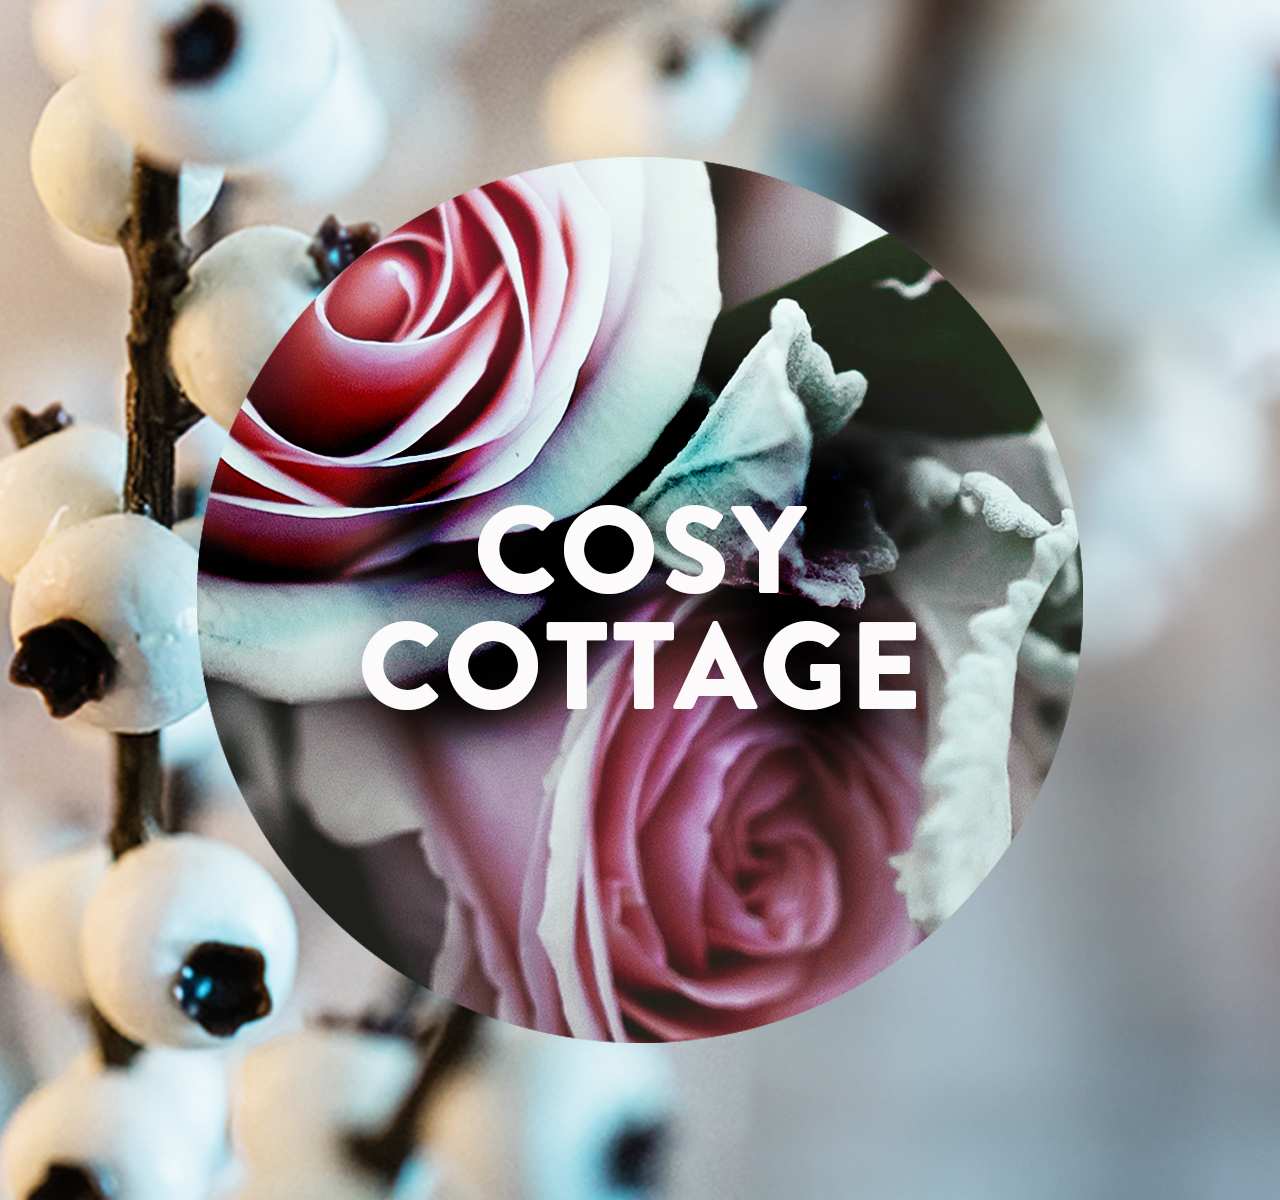 Winter Rose and Snowberry, the scents and undertones for Air Wick Air Freshener Cosy Cottage